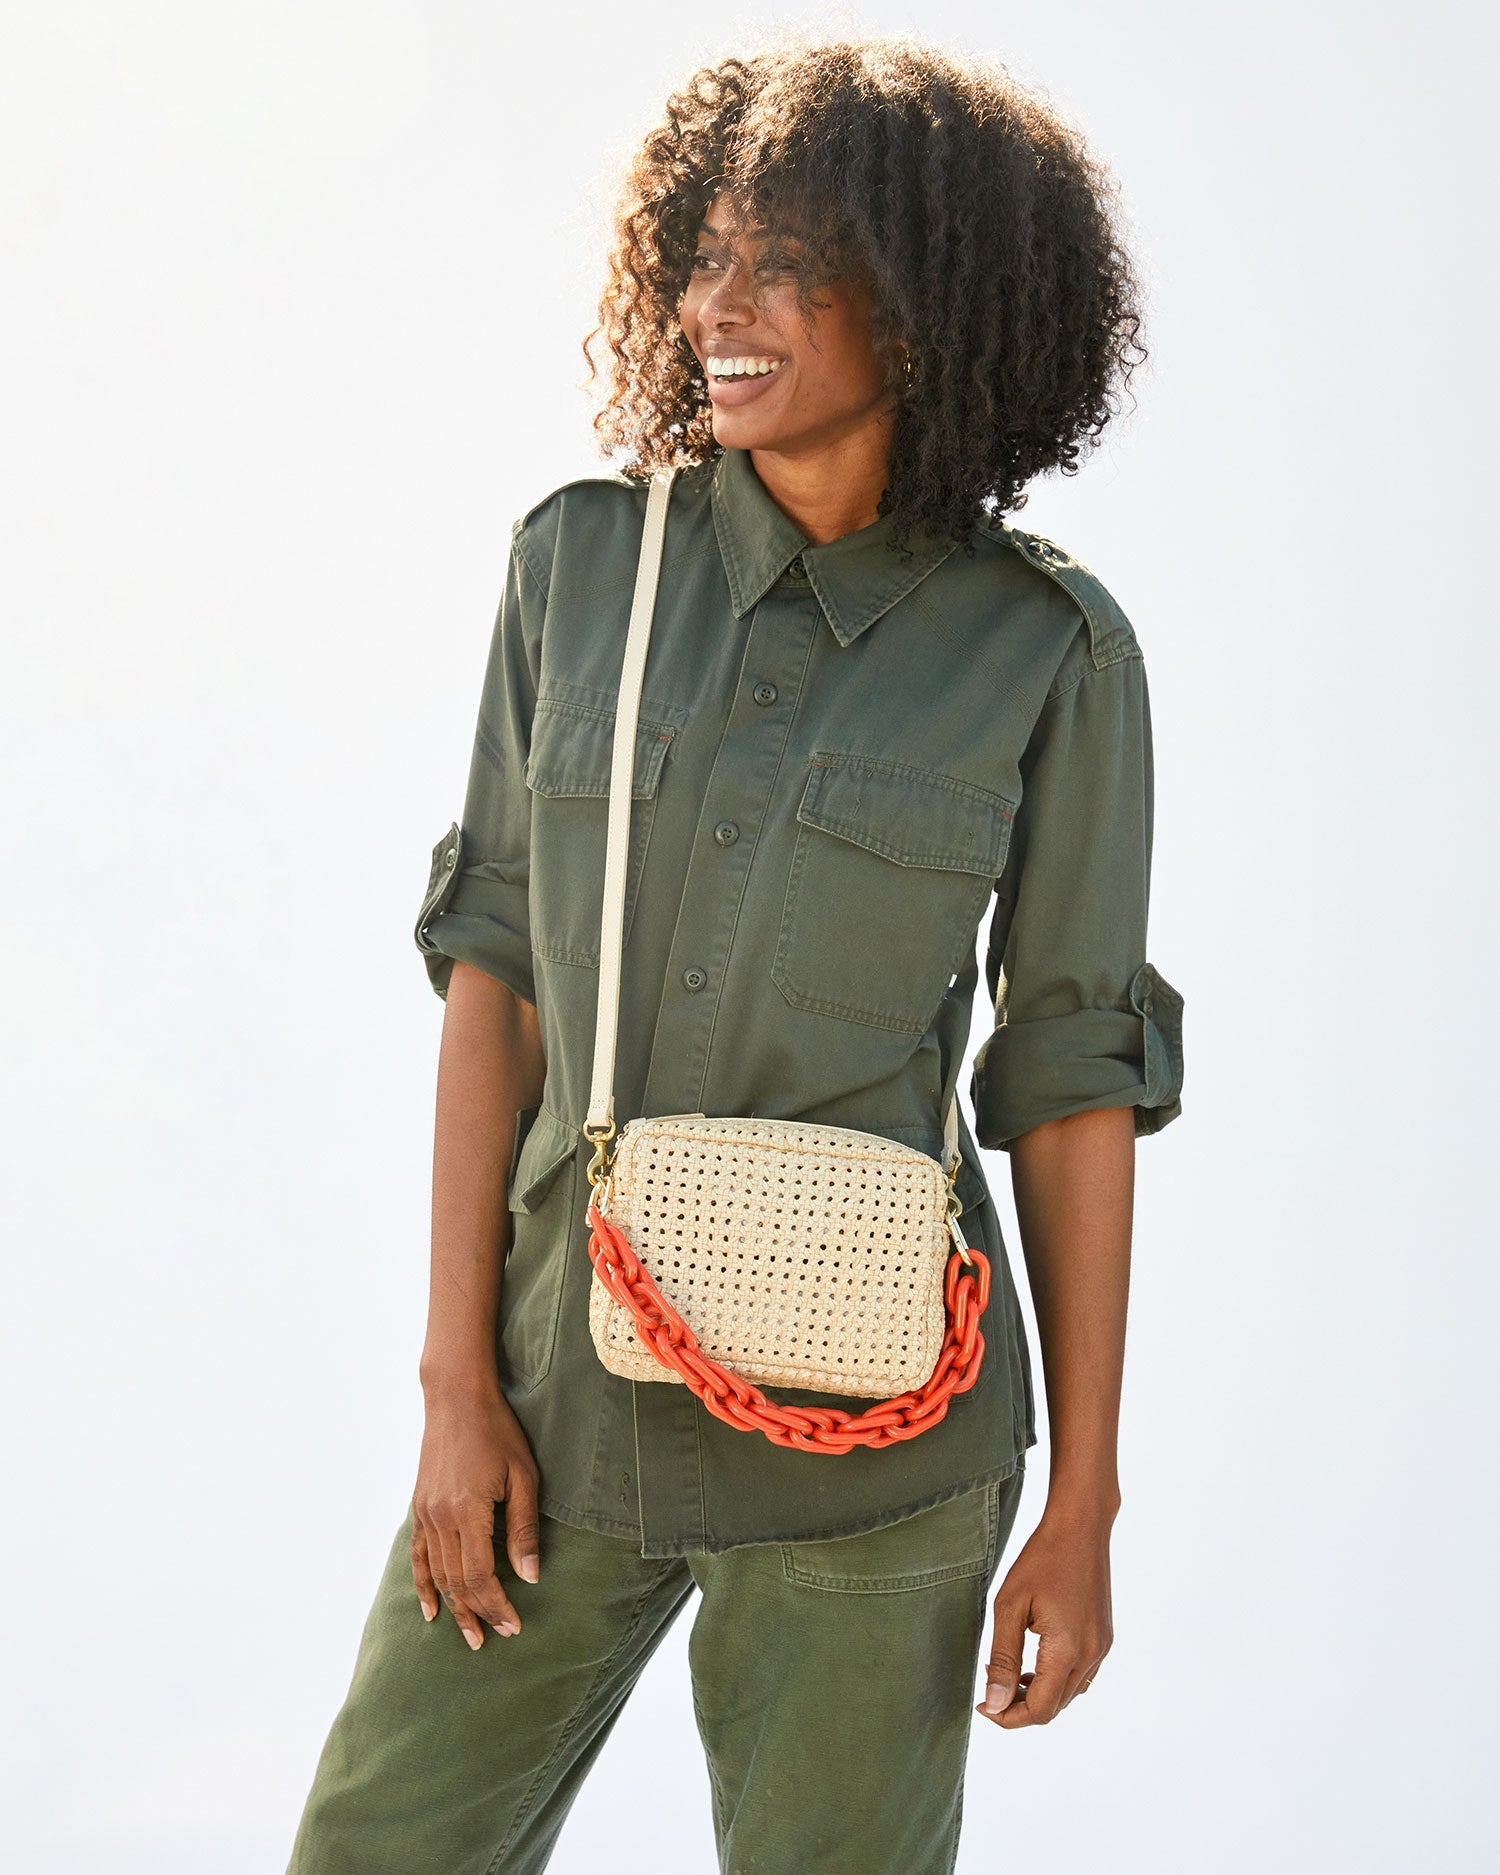 mecca smiling with the Cream Rattan Midi Sac on crossbody with the neon orange resin shortie strap attached